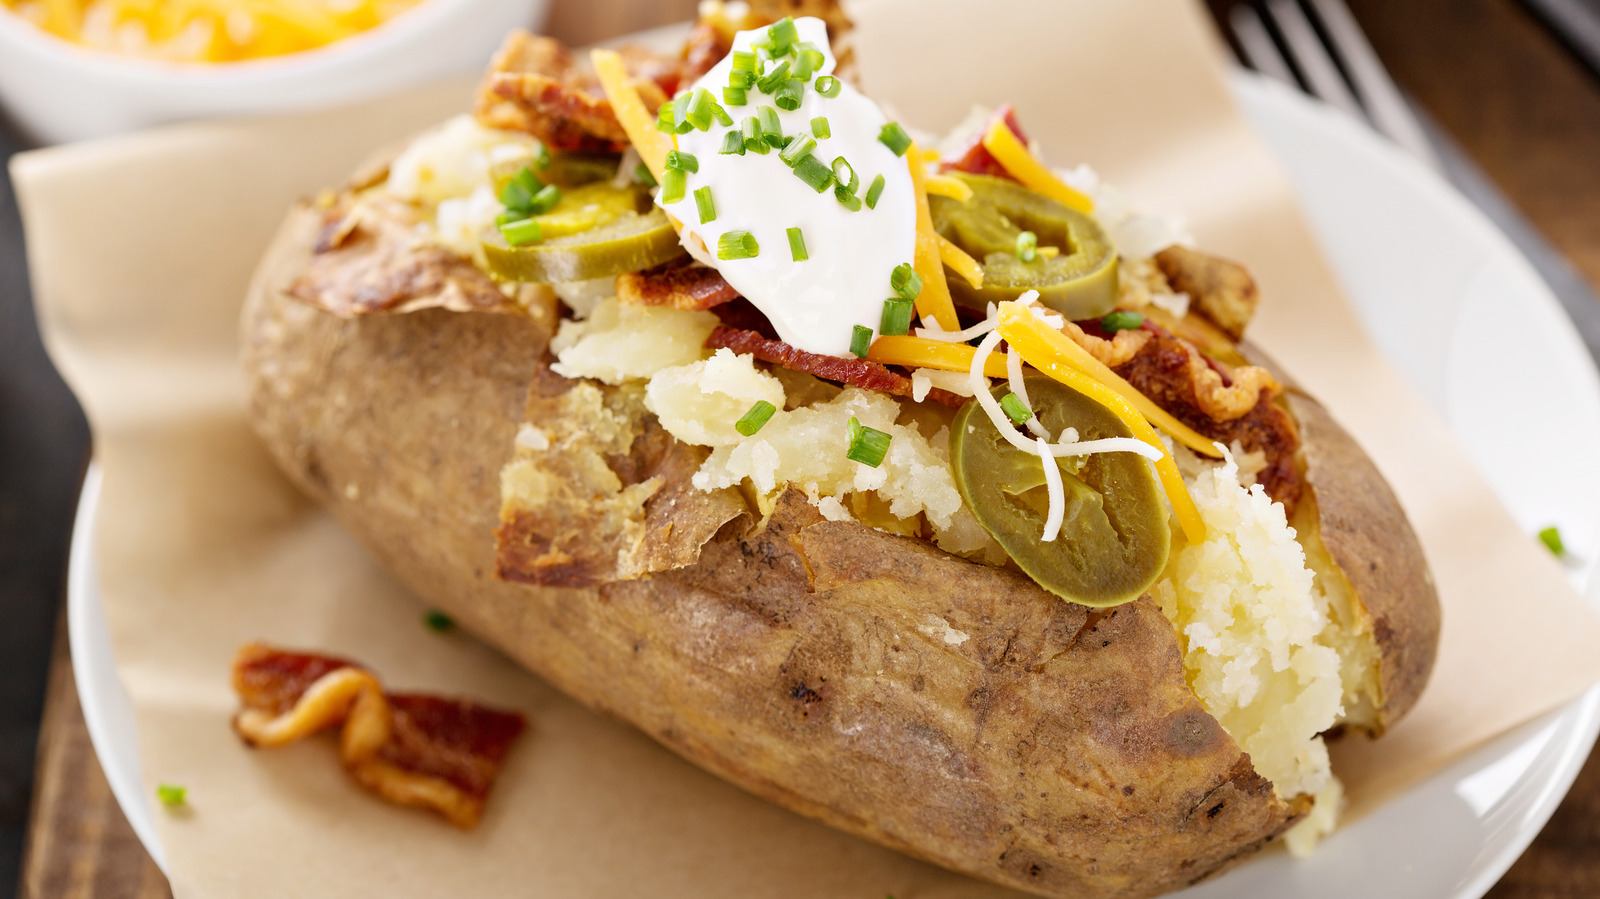 This Baked Potato Order Is A Red Flag For Wendy's Employees